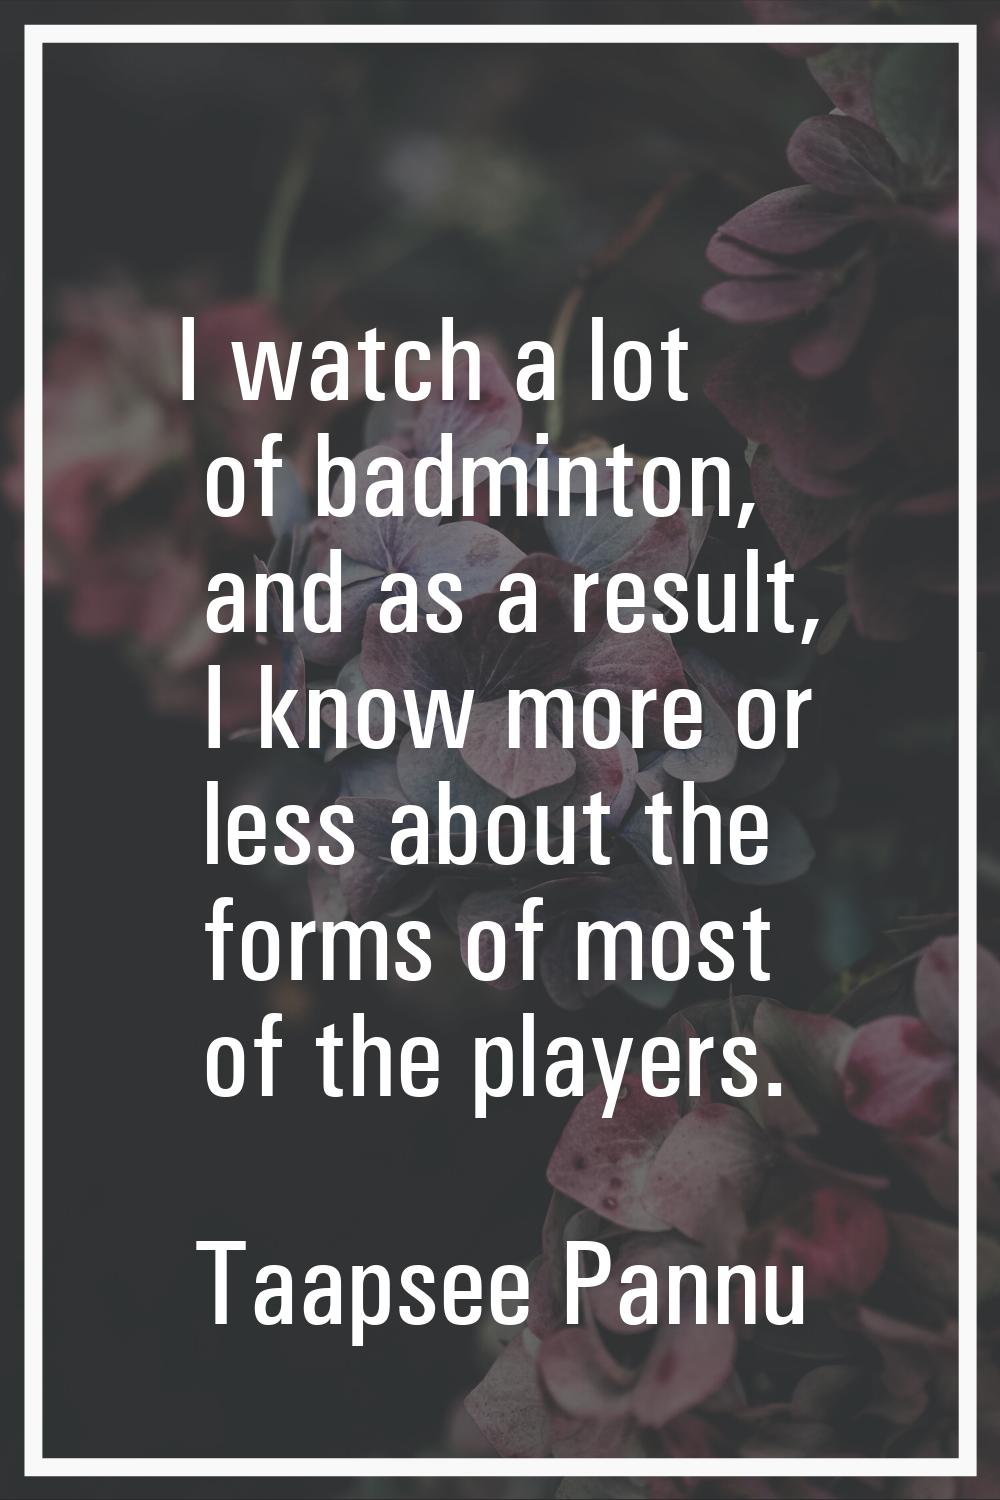 I watch a lot of badminton, and as a result, I know more or less about the forms of most of the pla